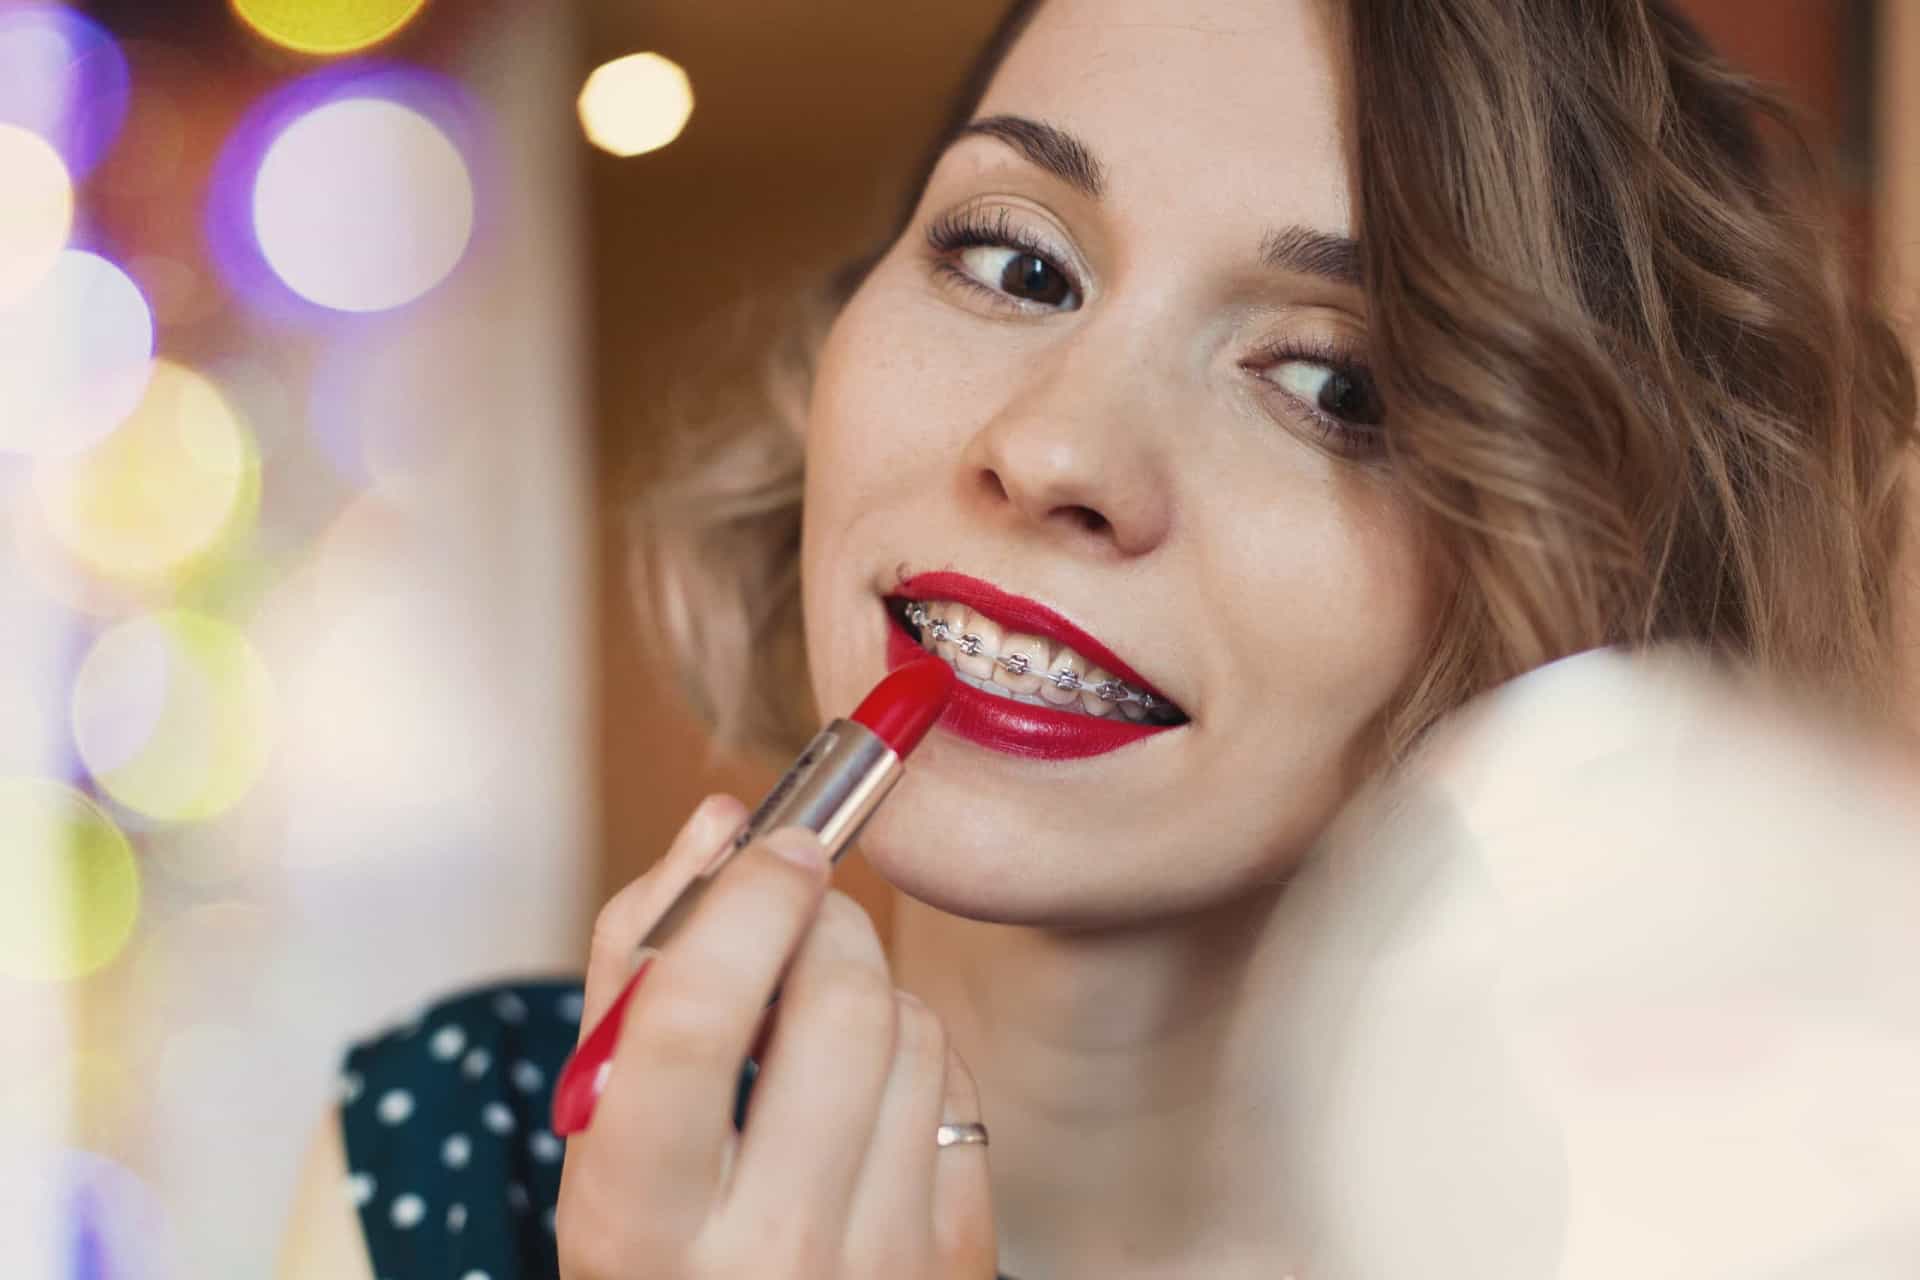 <p>Going to your dentist appointment with your face full of makeup is not a great idea. While a bit of blush and mascara is okay, avoid foundation and, especially, lipstick.</p><p><a href="https://www.msn.com/en-us/community/channel/vid-7xx8mnucu55yw63we9va2gwr7uihbxwc68fxqp25x6tg4ftibpra?cvid=94631541bc0f4f89bfd59158d696ad7e">Follow us and access great exclusive content everyday</a></p>